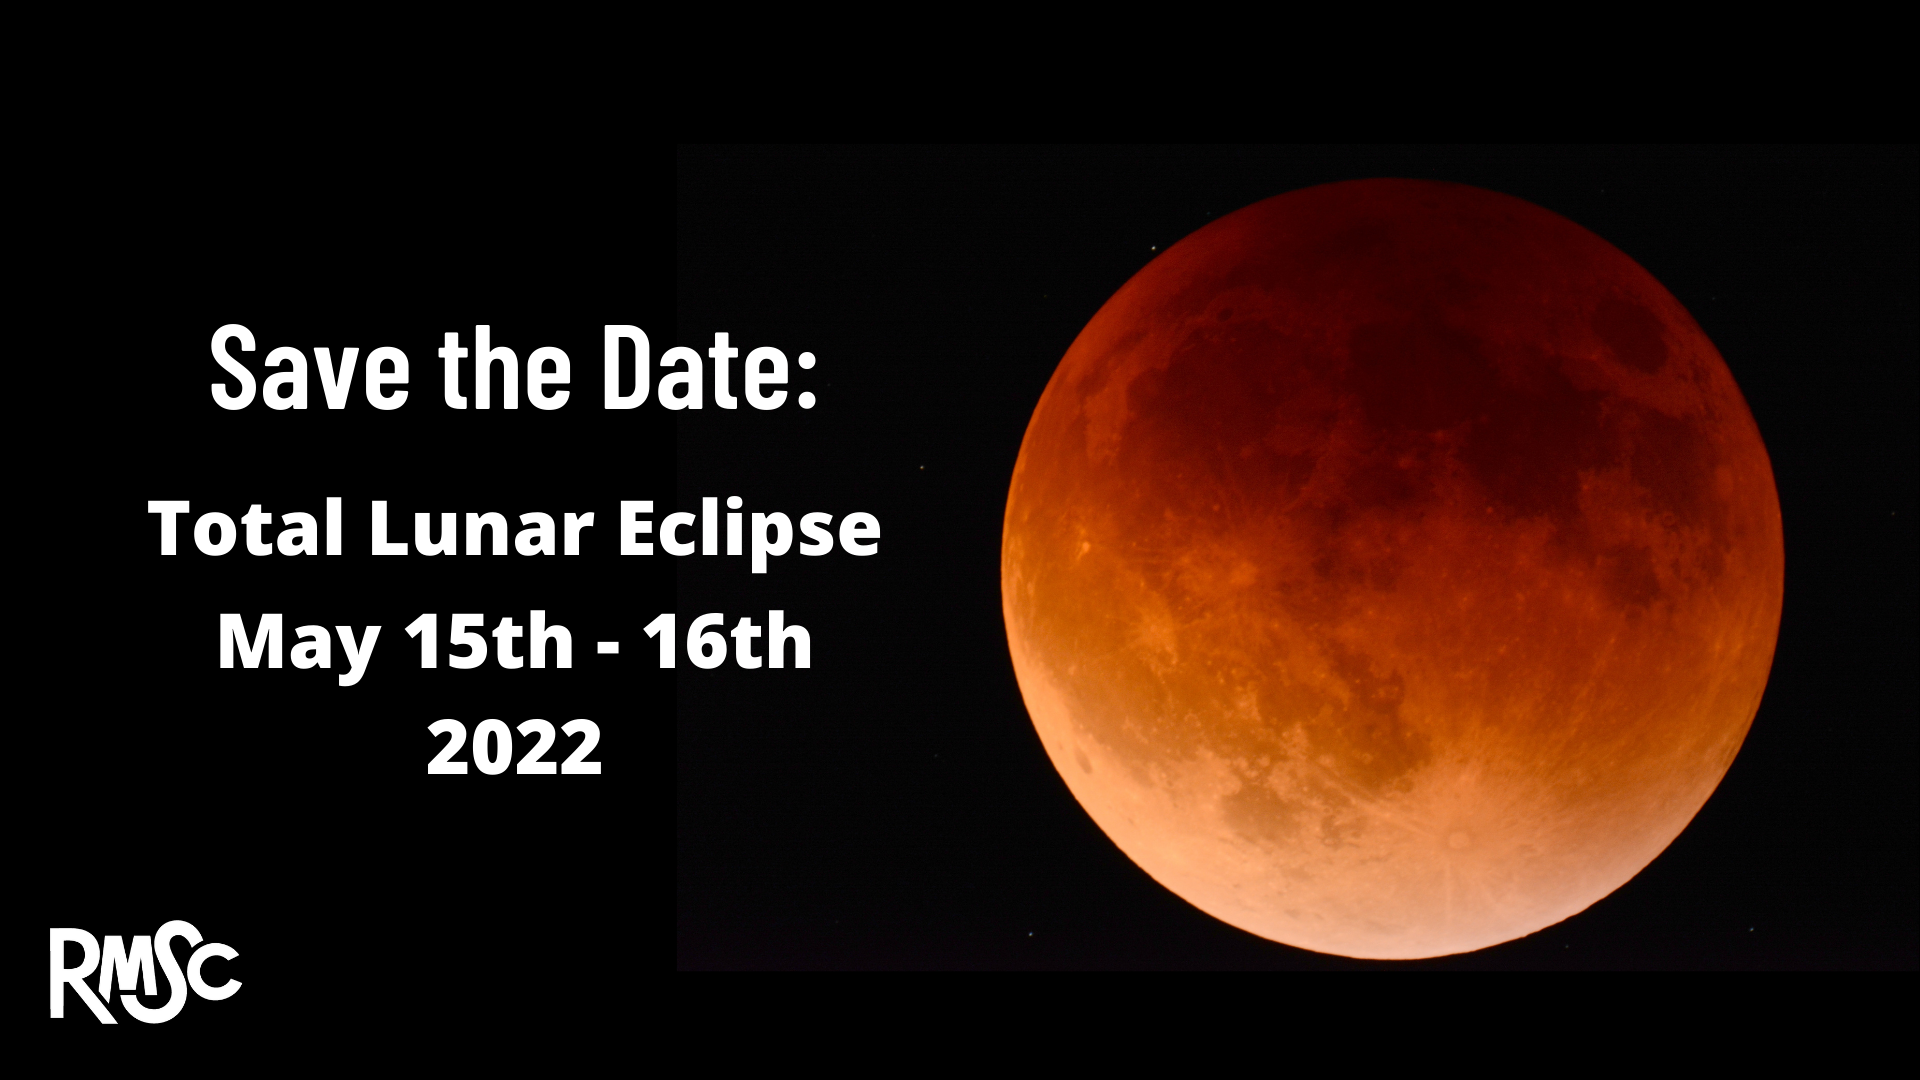 Save the Date: Lunar Eclipse on May 15/16, 2022